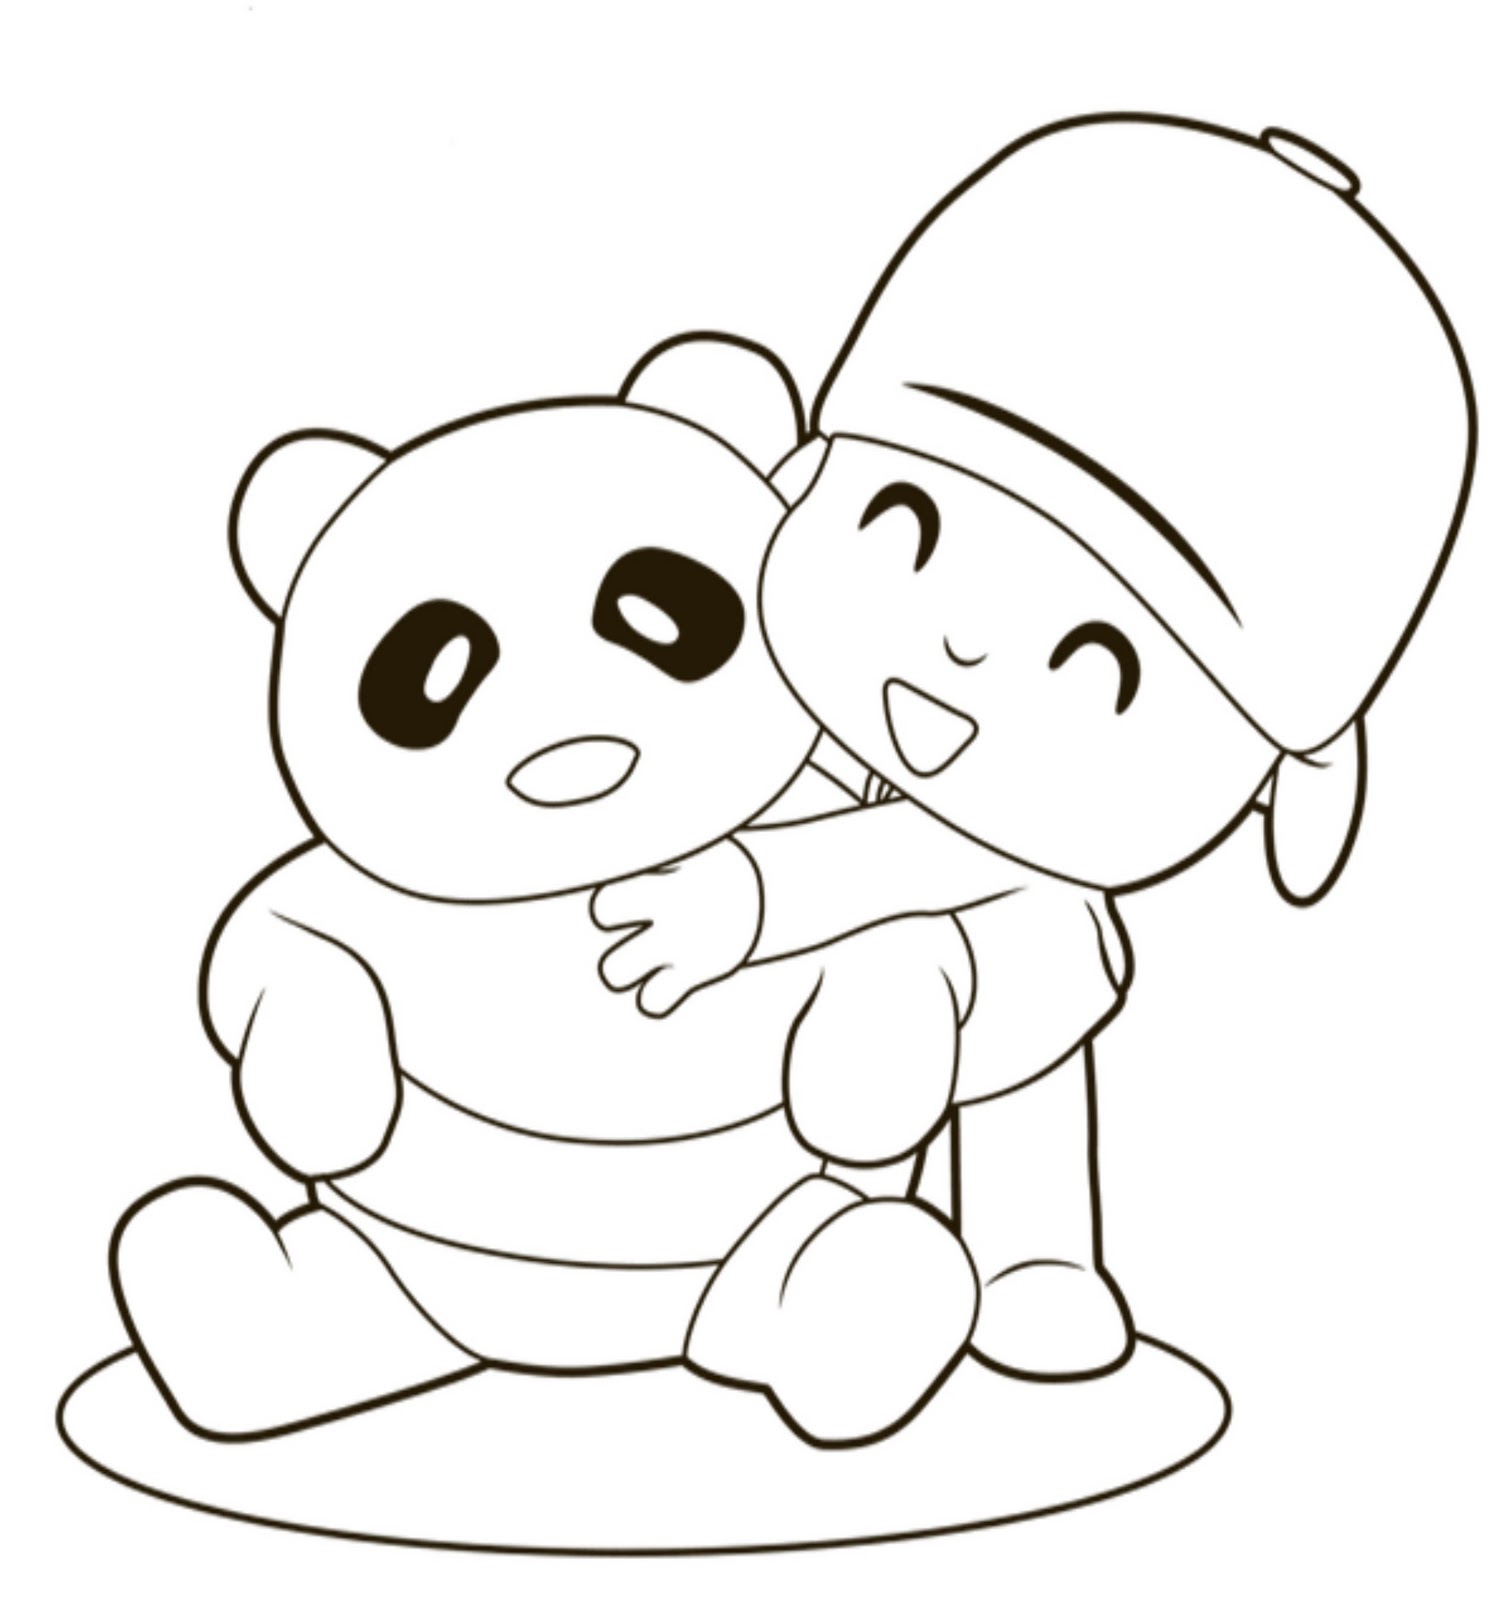 Drawings To Paint & Colour Pocoyo - Print Design 016